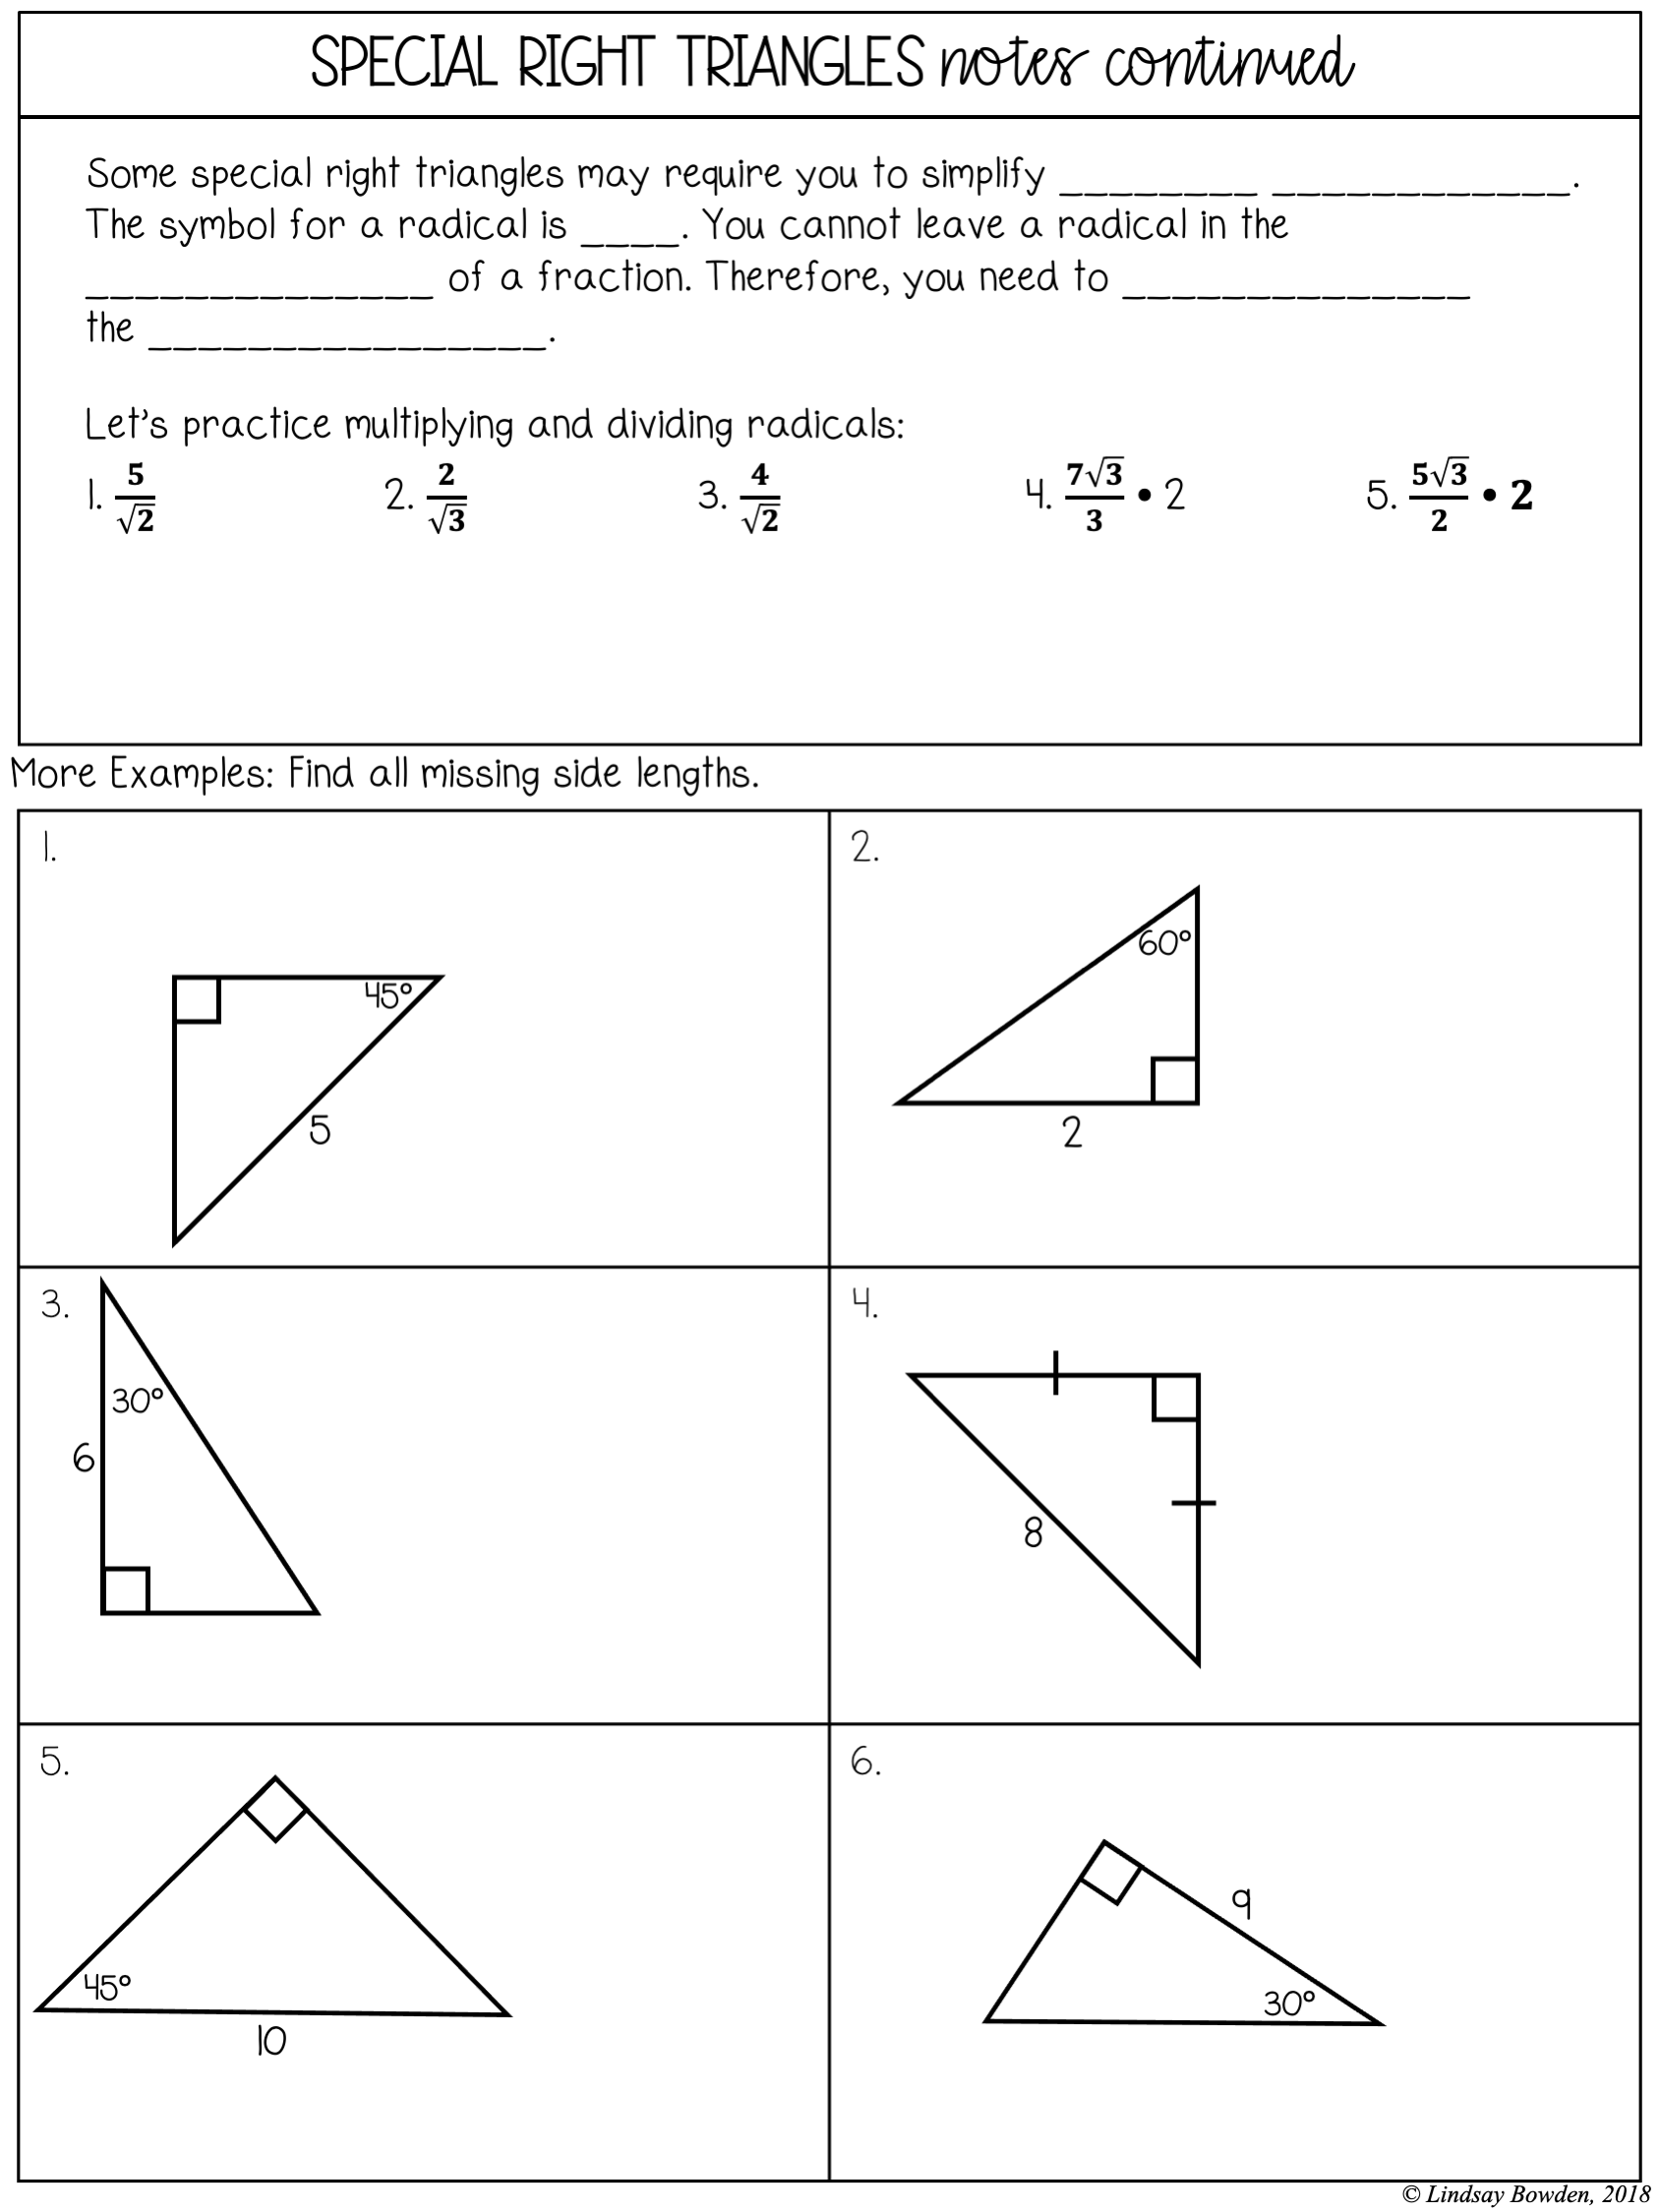 Special Right Triangles Notes and Worksheets - Lindsay Bowden Pertaining To Special Right Triangles Worksheet